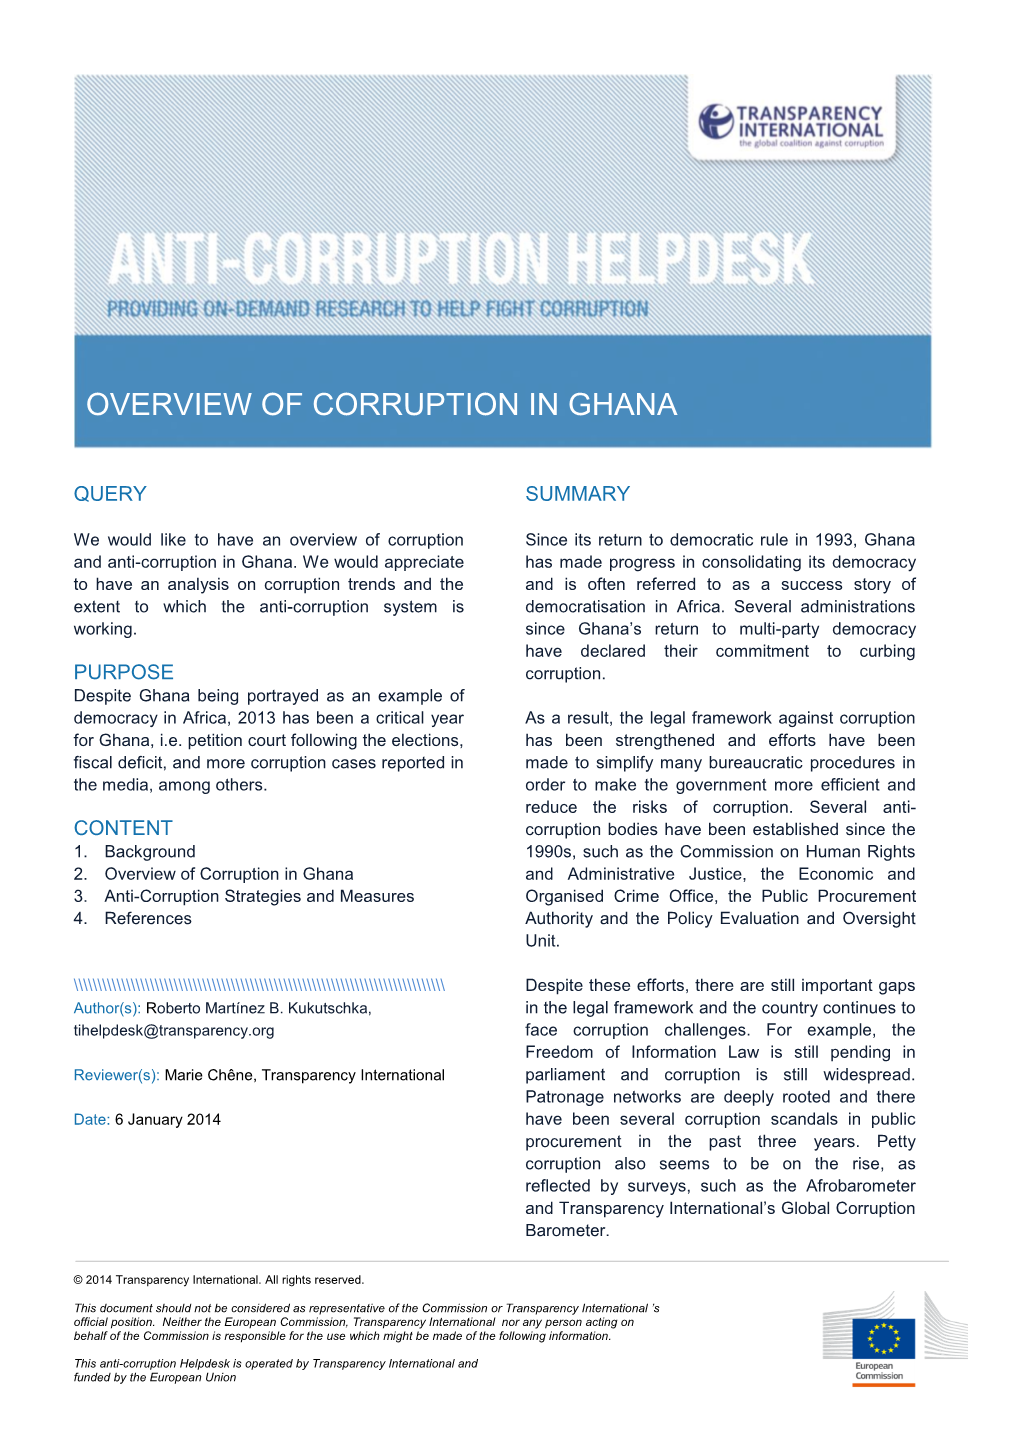 Overview of Corruption in Ghana